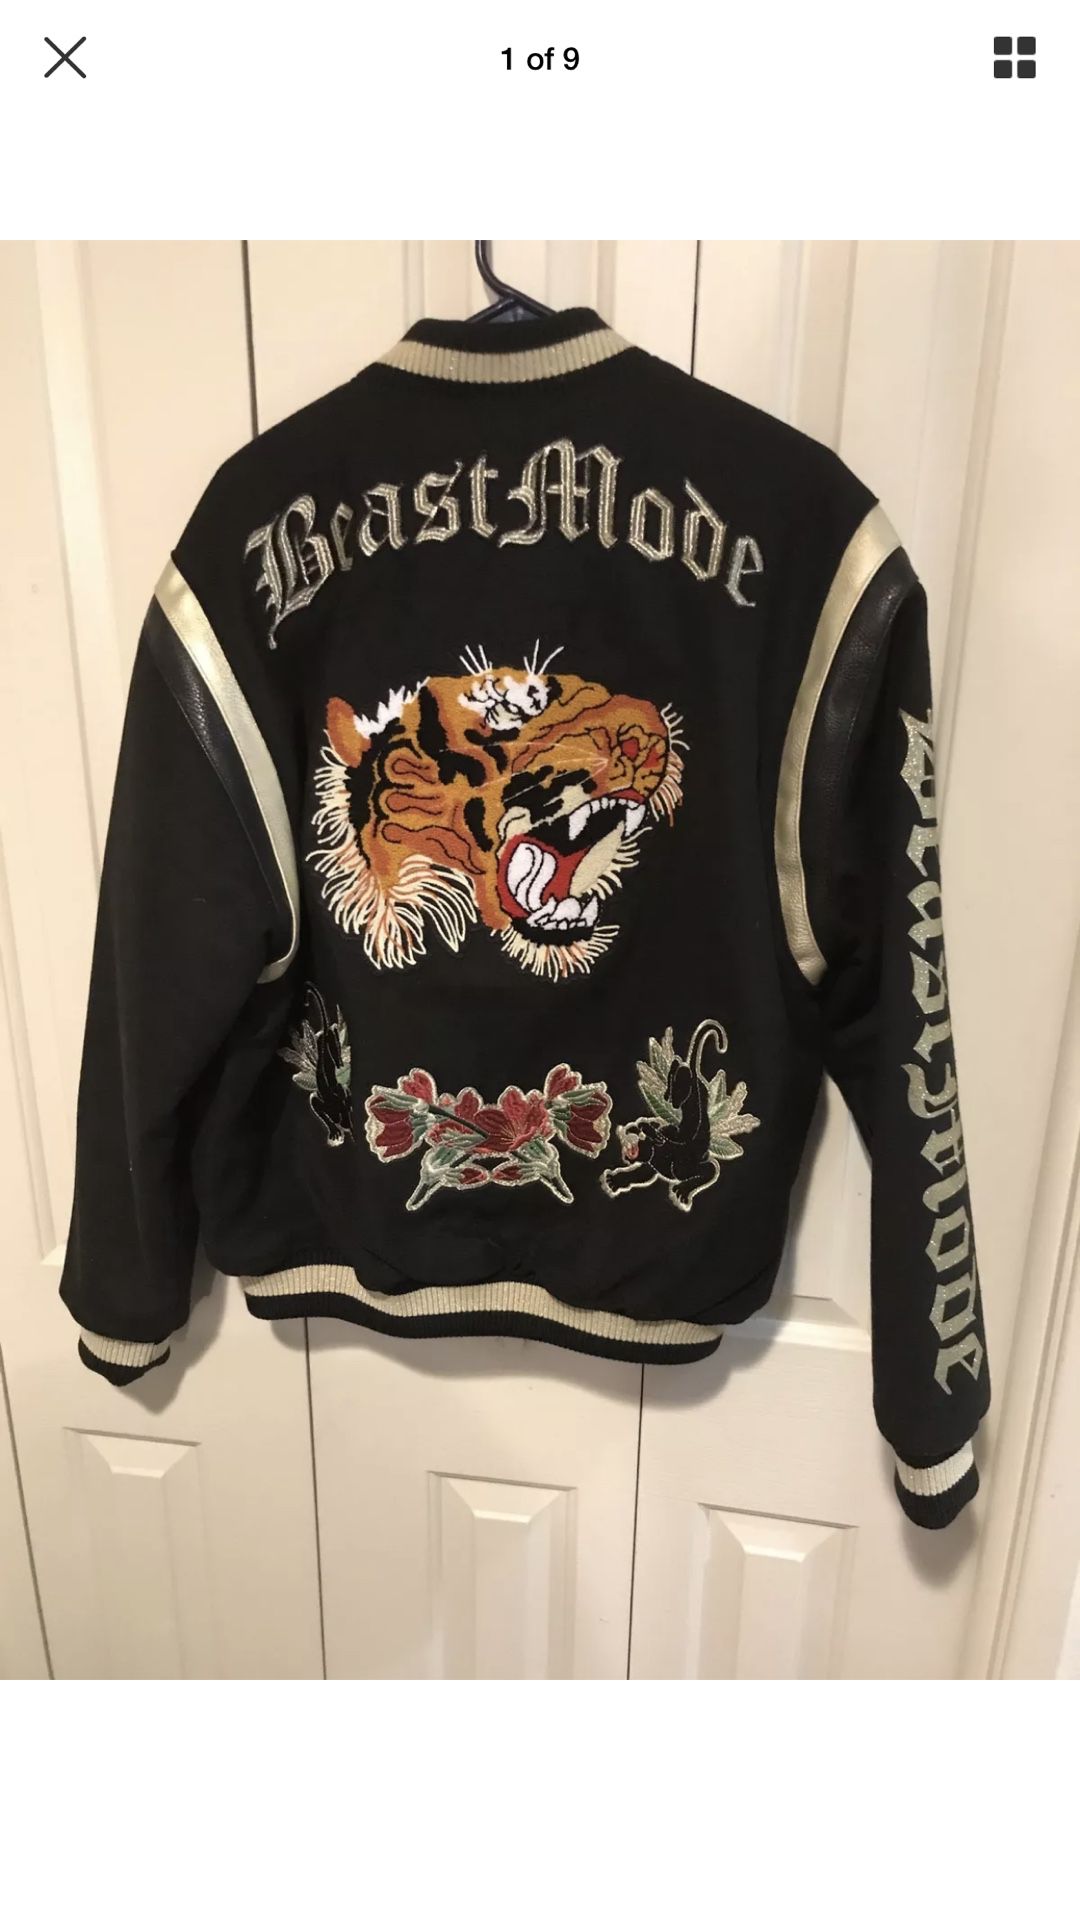 Hudson beast mode large jacket black gold New with tags tiger